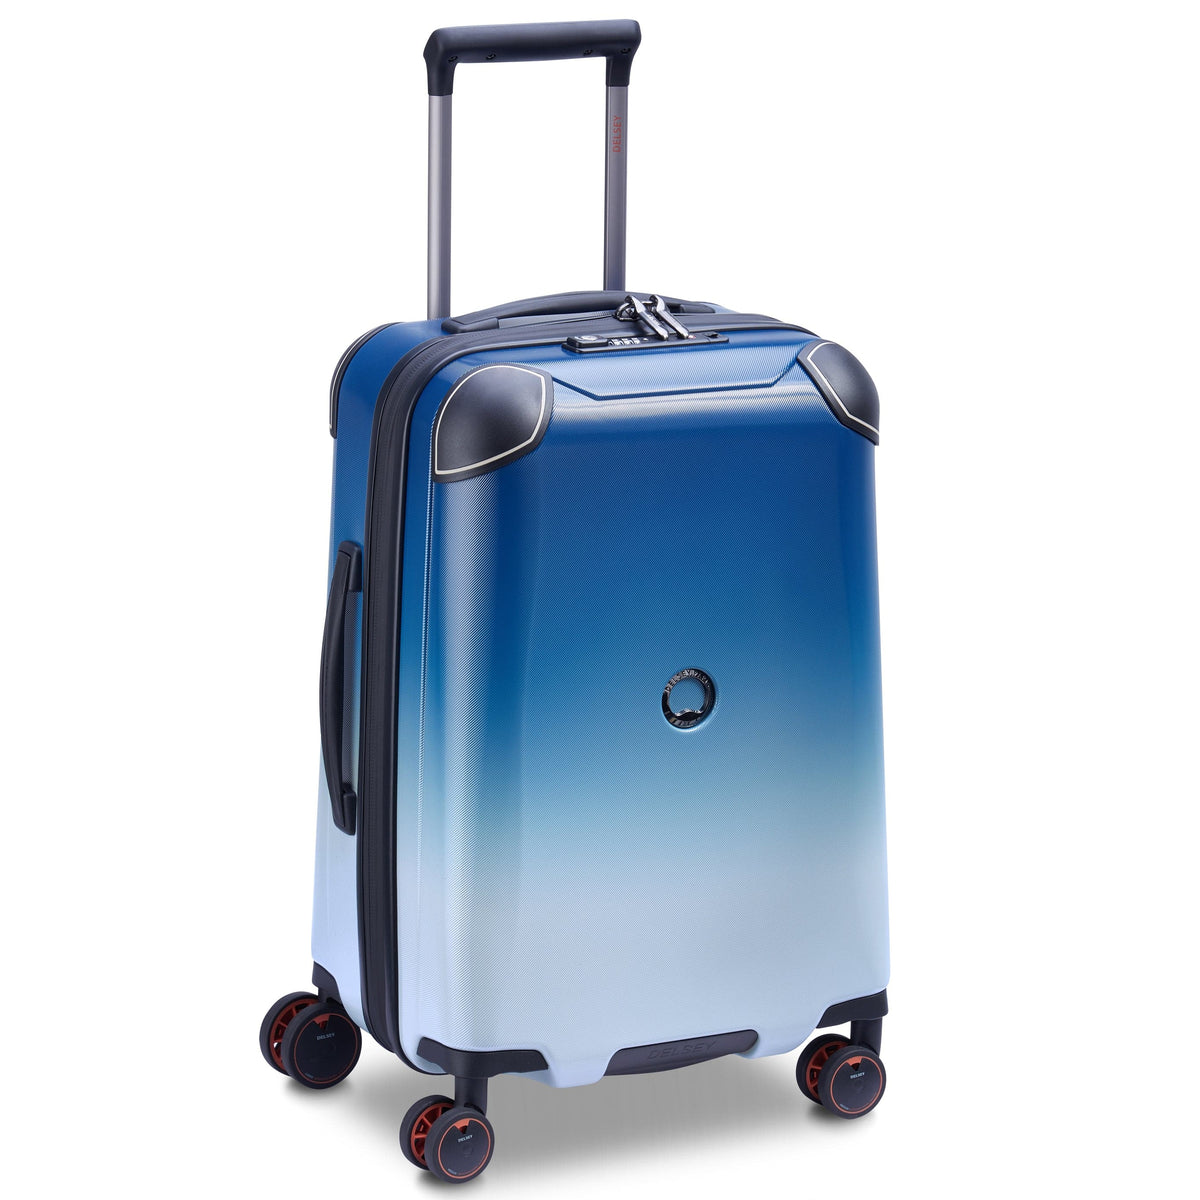 Delsey Cactus Carry-On Spinner Luggage - 20" Small